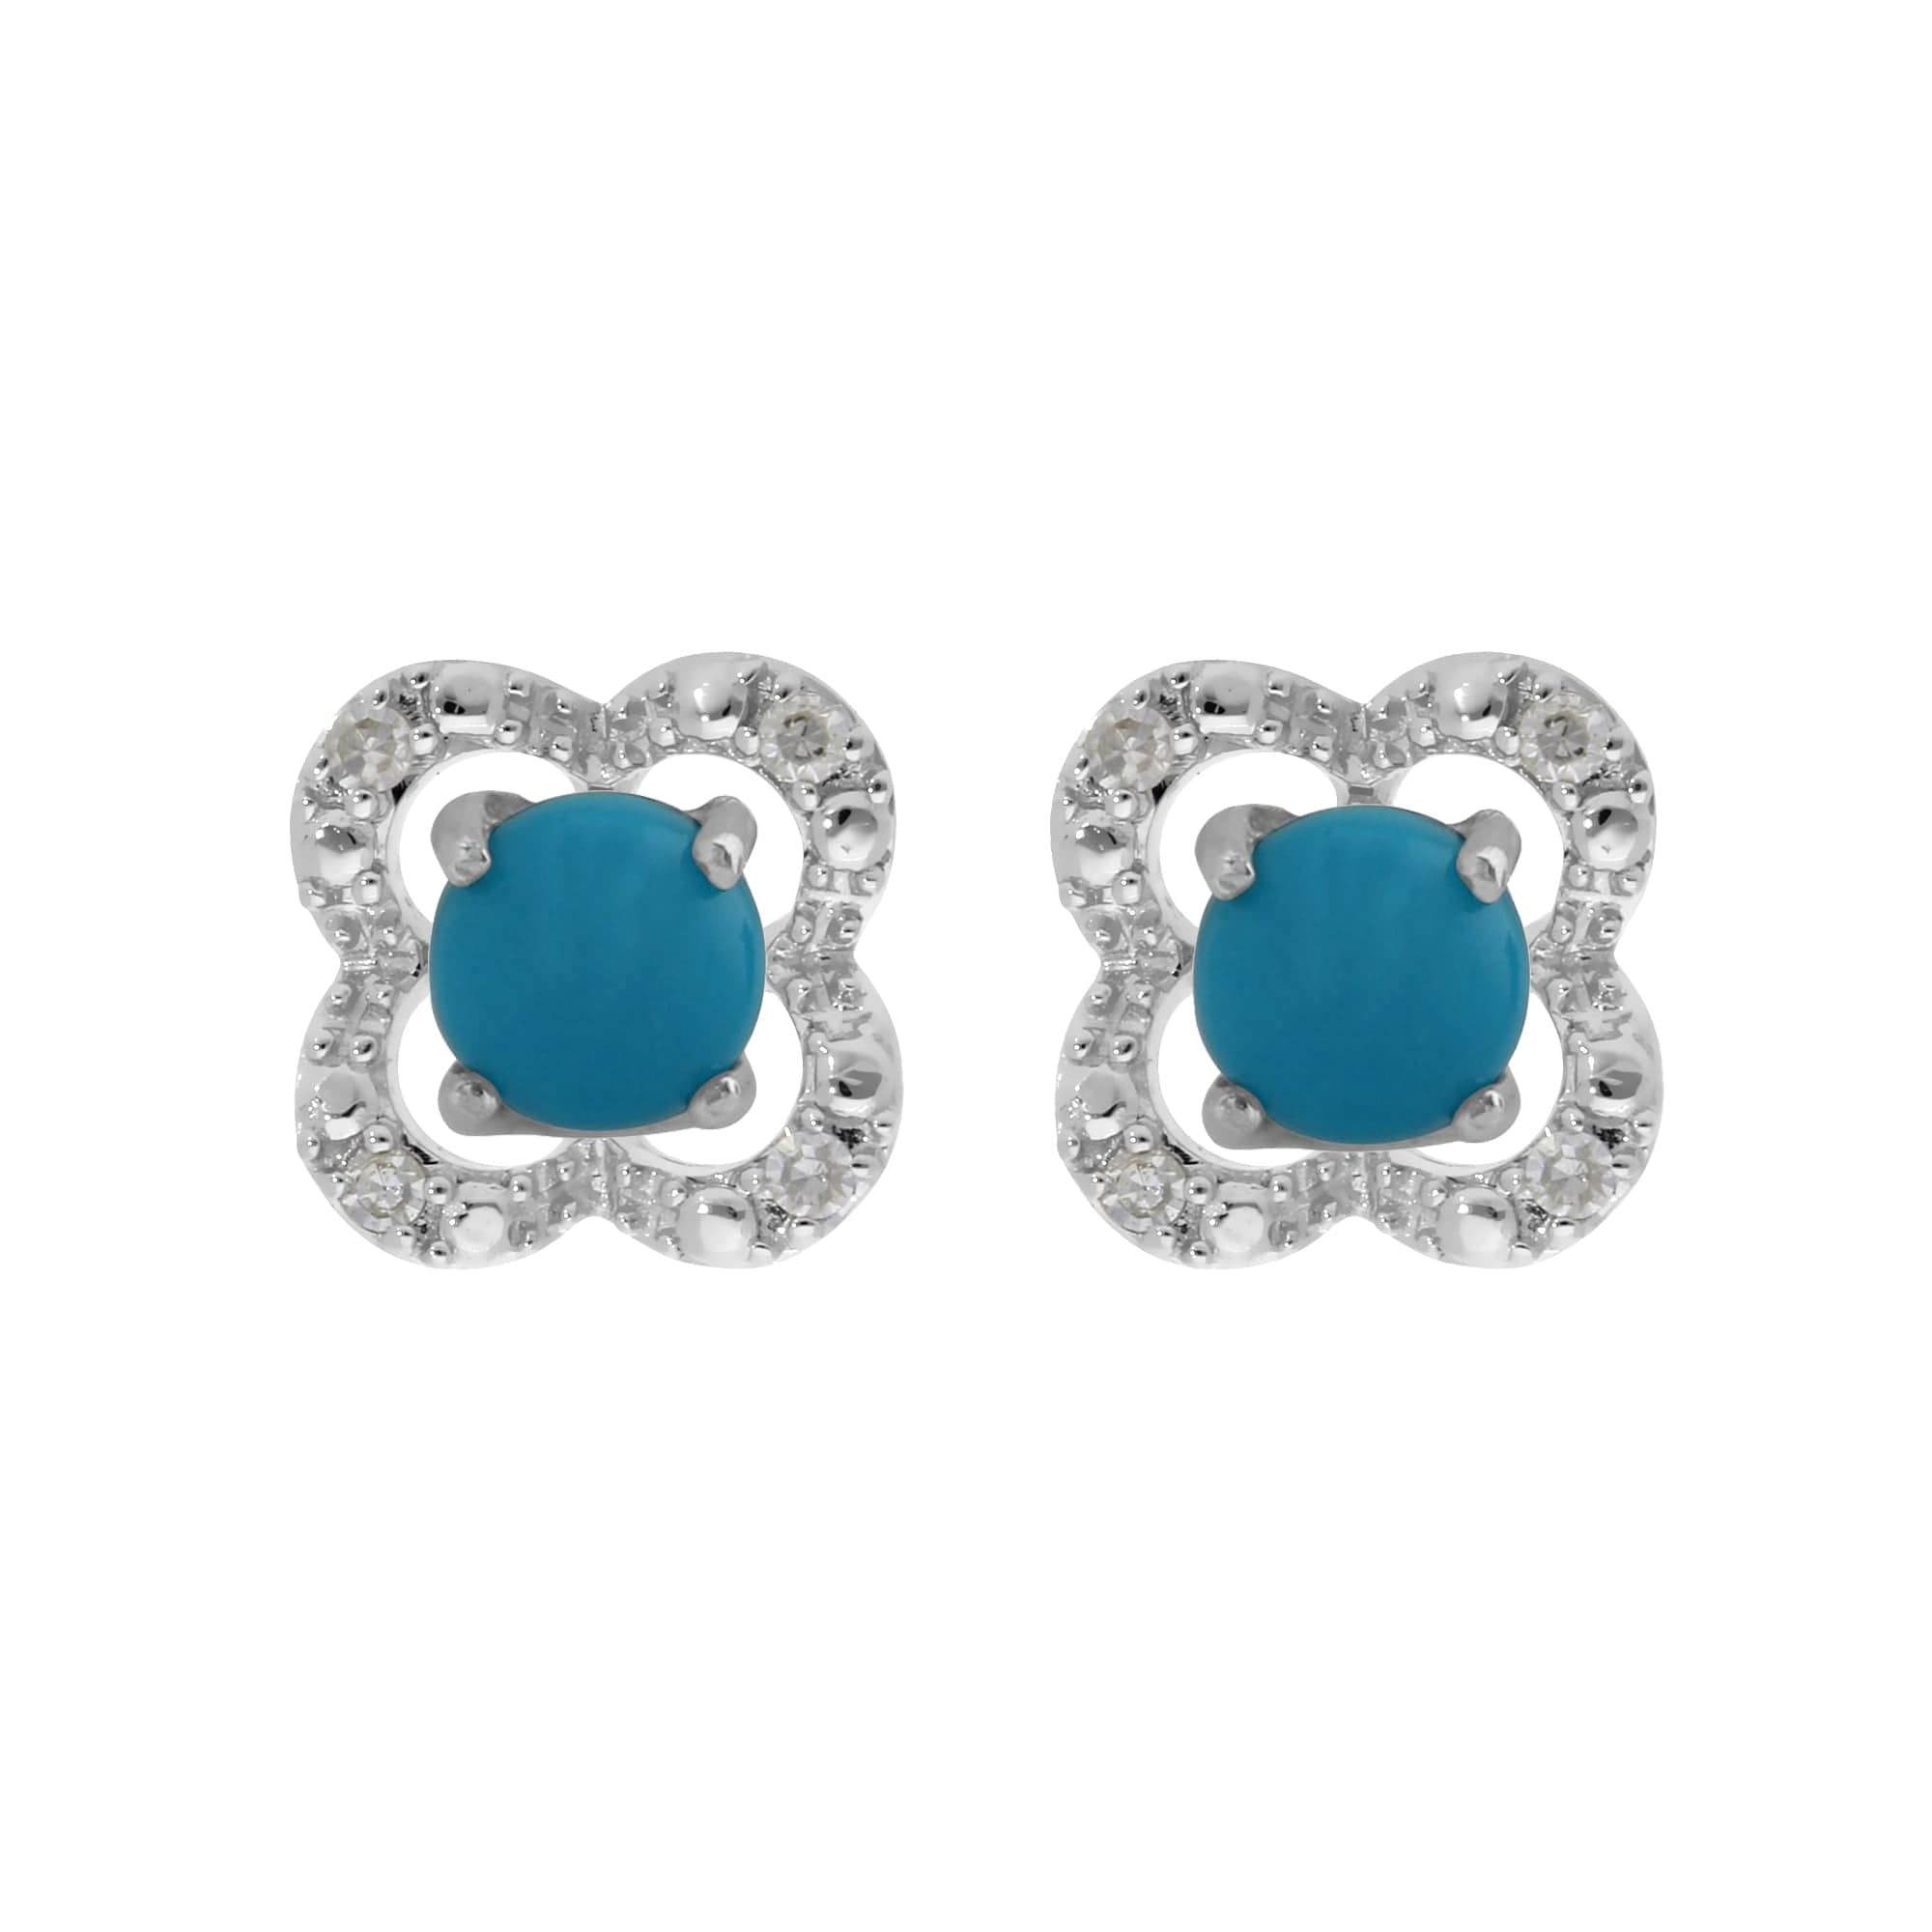 162E0071219-162E0244019 Classic Round Turquoise Stud Earrings with Detachable Diamond Flower Ear Jacket in 9ct White Gold 1